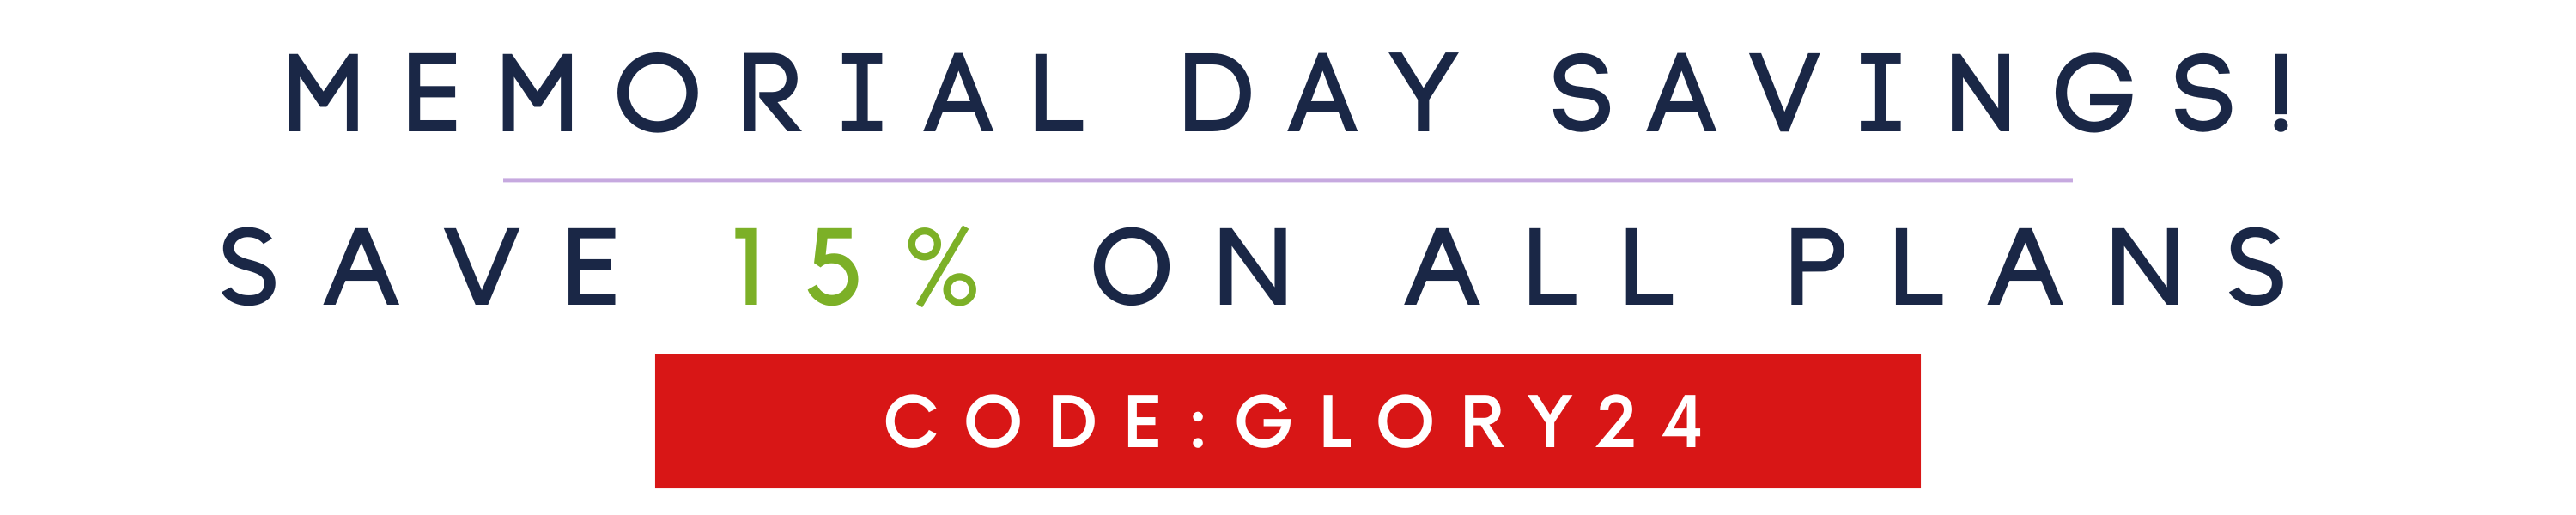 Memorial Day Sale | Use Code: Glory24